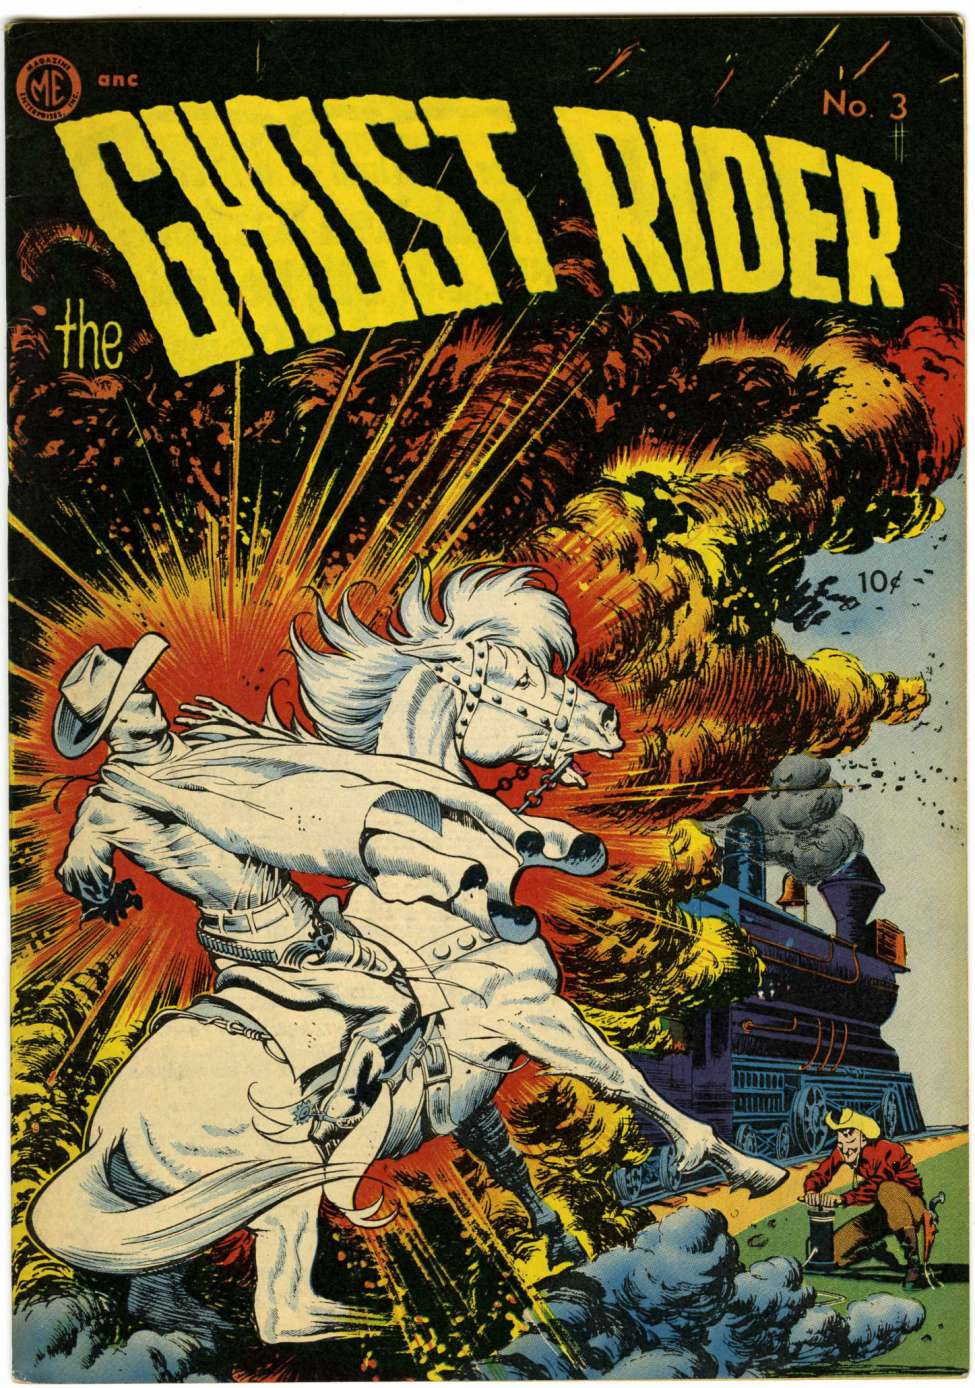 LARGE DOWNLOAD GHOST RIDER COMIC BOOKS CBR-CBZ FILES DOWNLOAD 